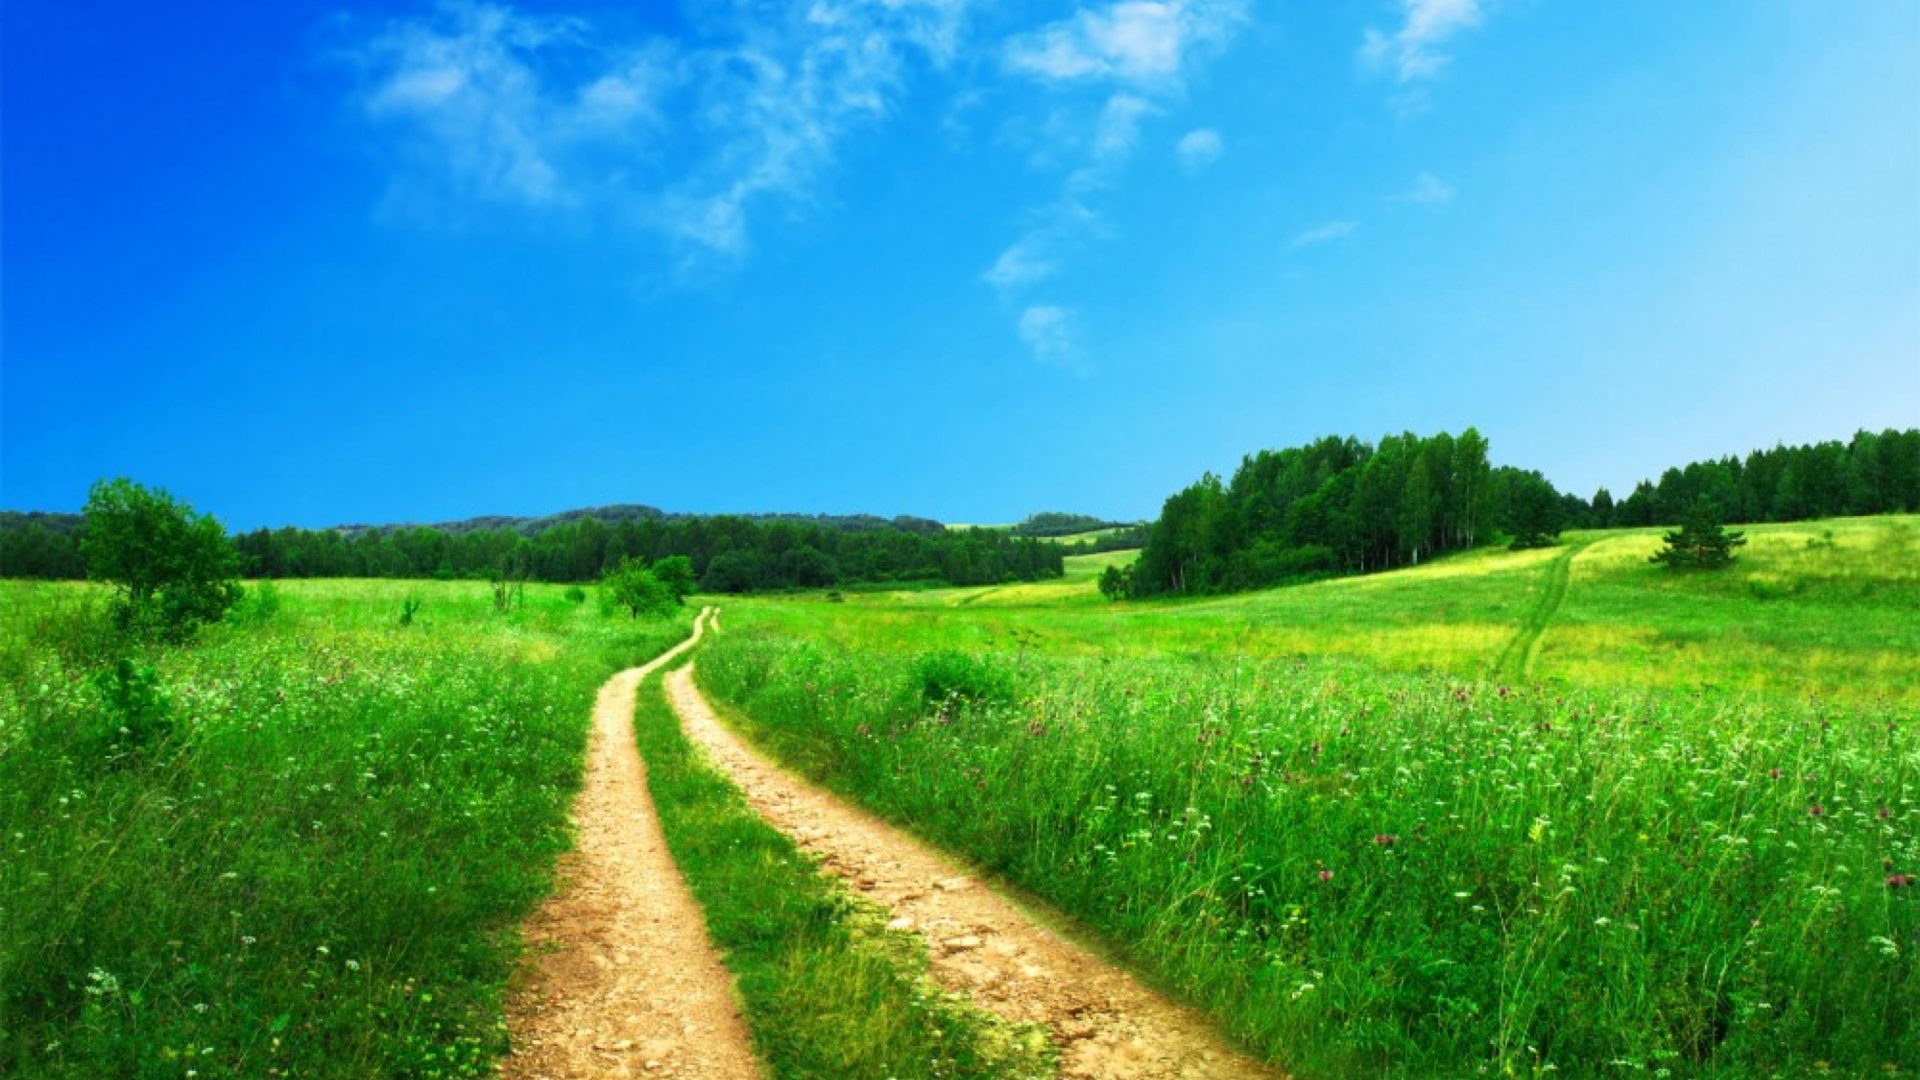 Nature Country Road Field With Green Meadow Blue Sky Summer Landscape Wallpaper HD 3840x2400, Wallpaper13.com